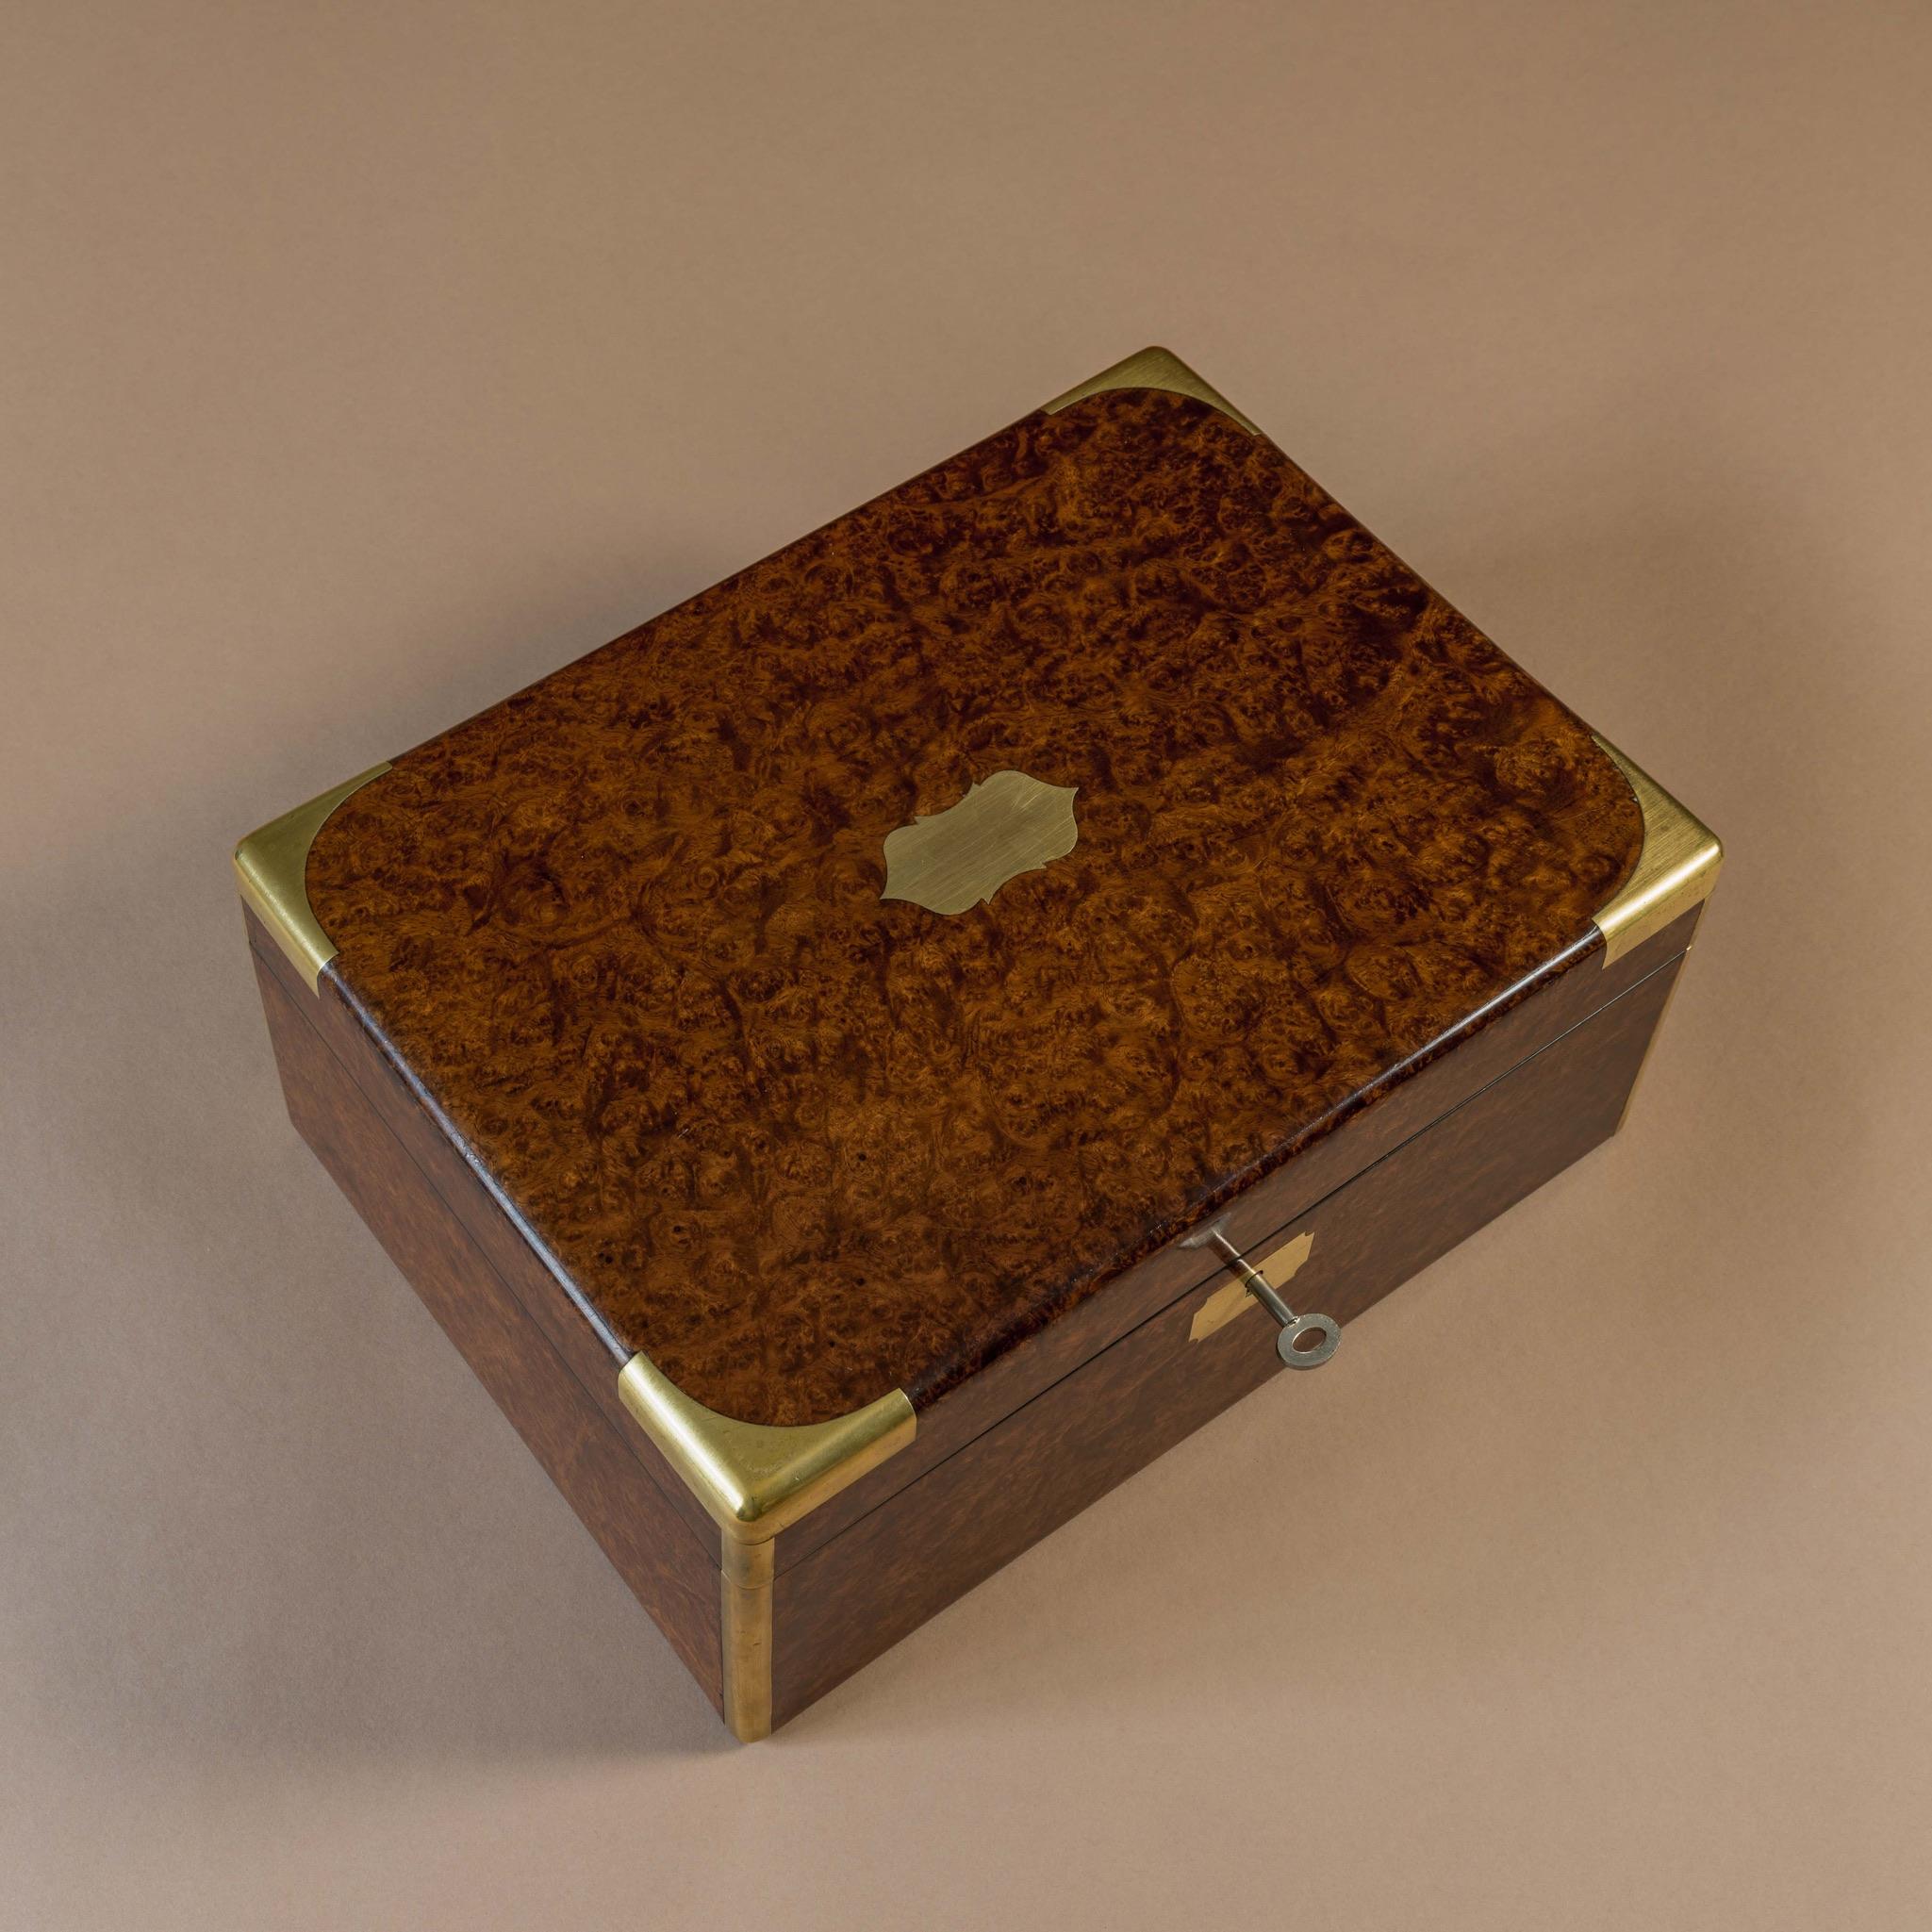 A superb brass bound walnut box Circa 1910 that has been re-lined in cedar at some point and converted to a humidor. Has a cedar divider, a brass cased humidification unit and a rubber seal to help maintain humidity. Also includes a